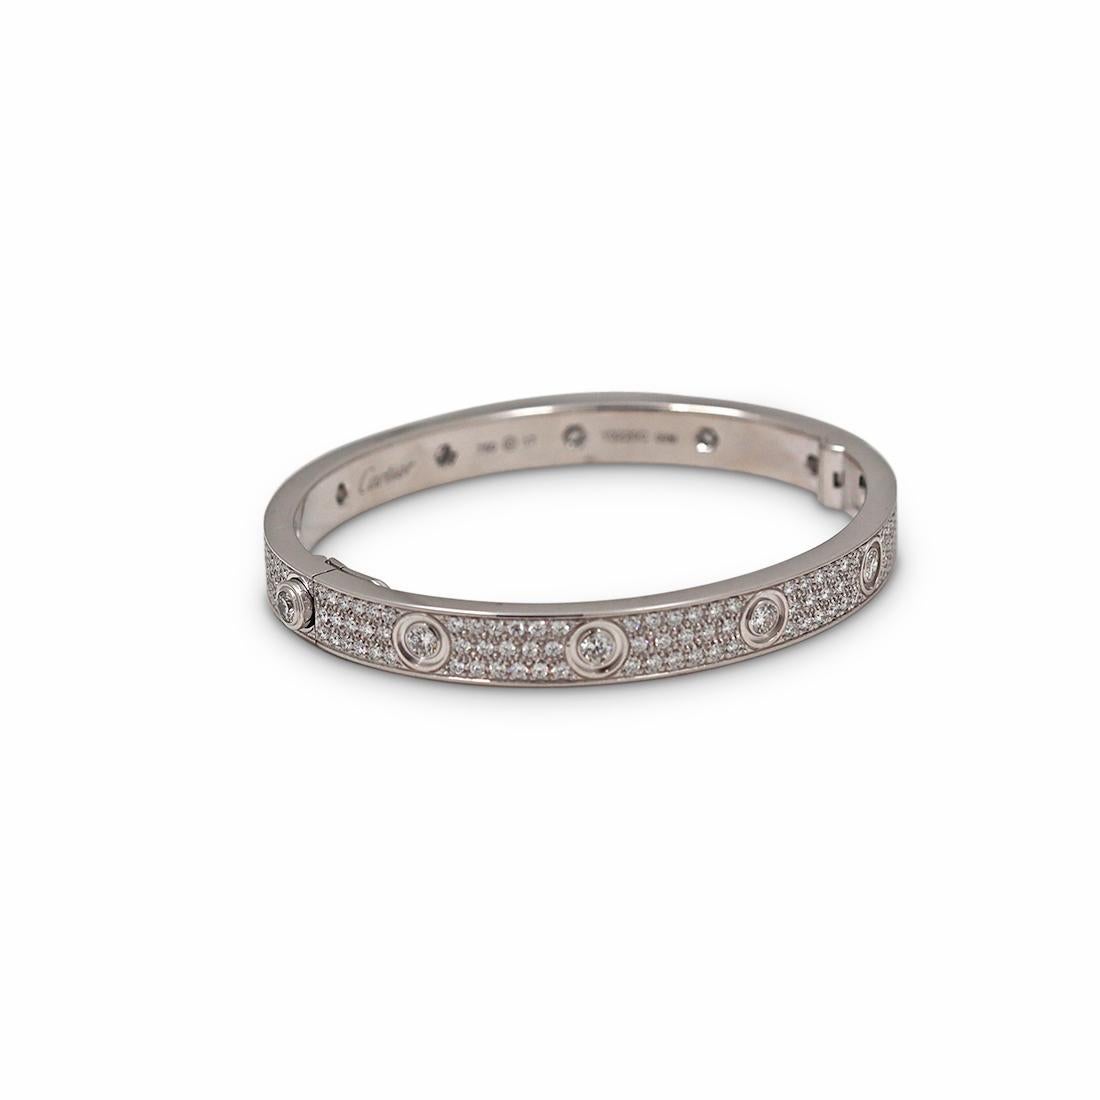 Authentic Cartier ''Love'' bangle bracelet crafted in 18 karat white gold with diamond screw tops and pave set round brilliant cut diamonds (D-F in colour, VVS clarity) for an estimated 3.15 carats total weight. Size 17. Signed Cartier, 17, 750,